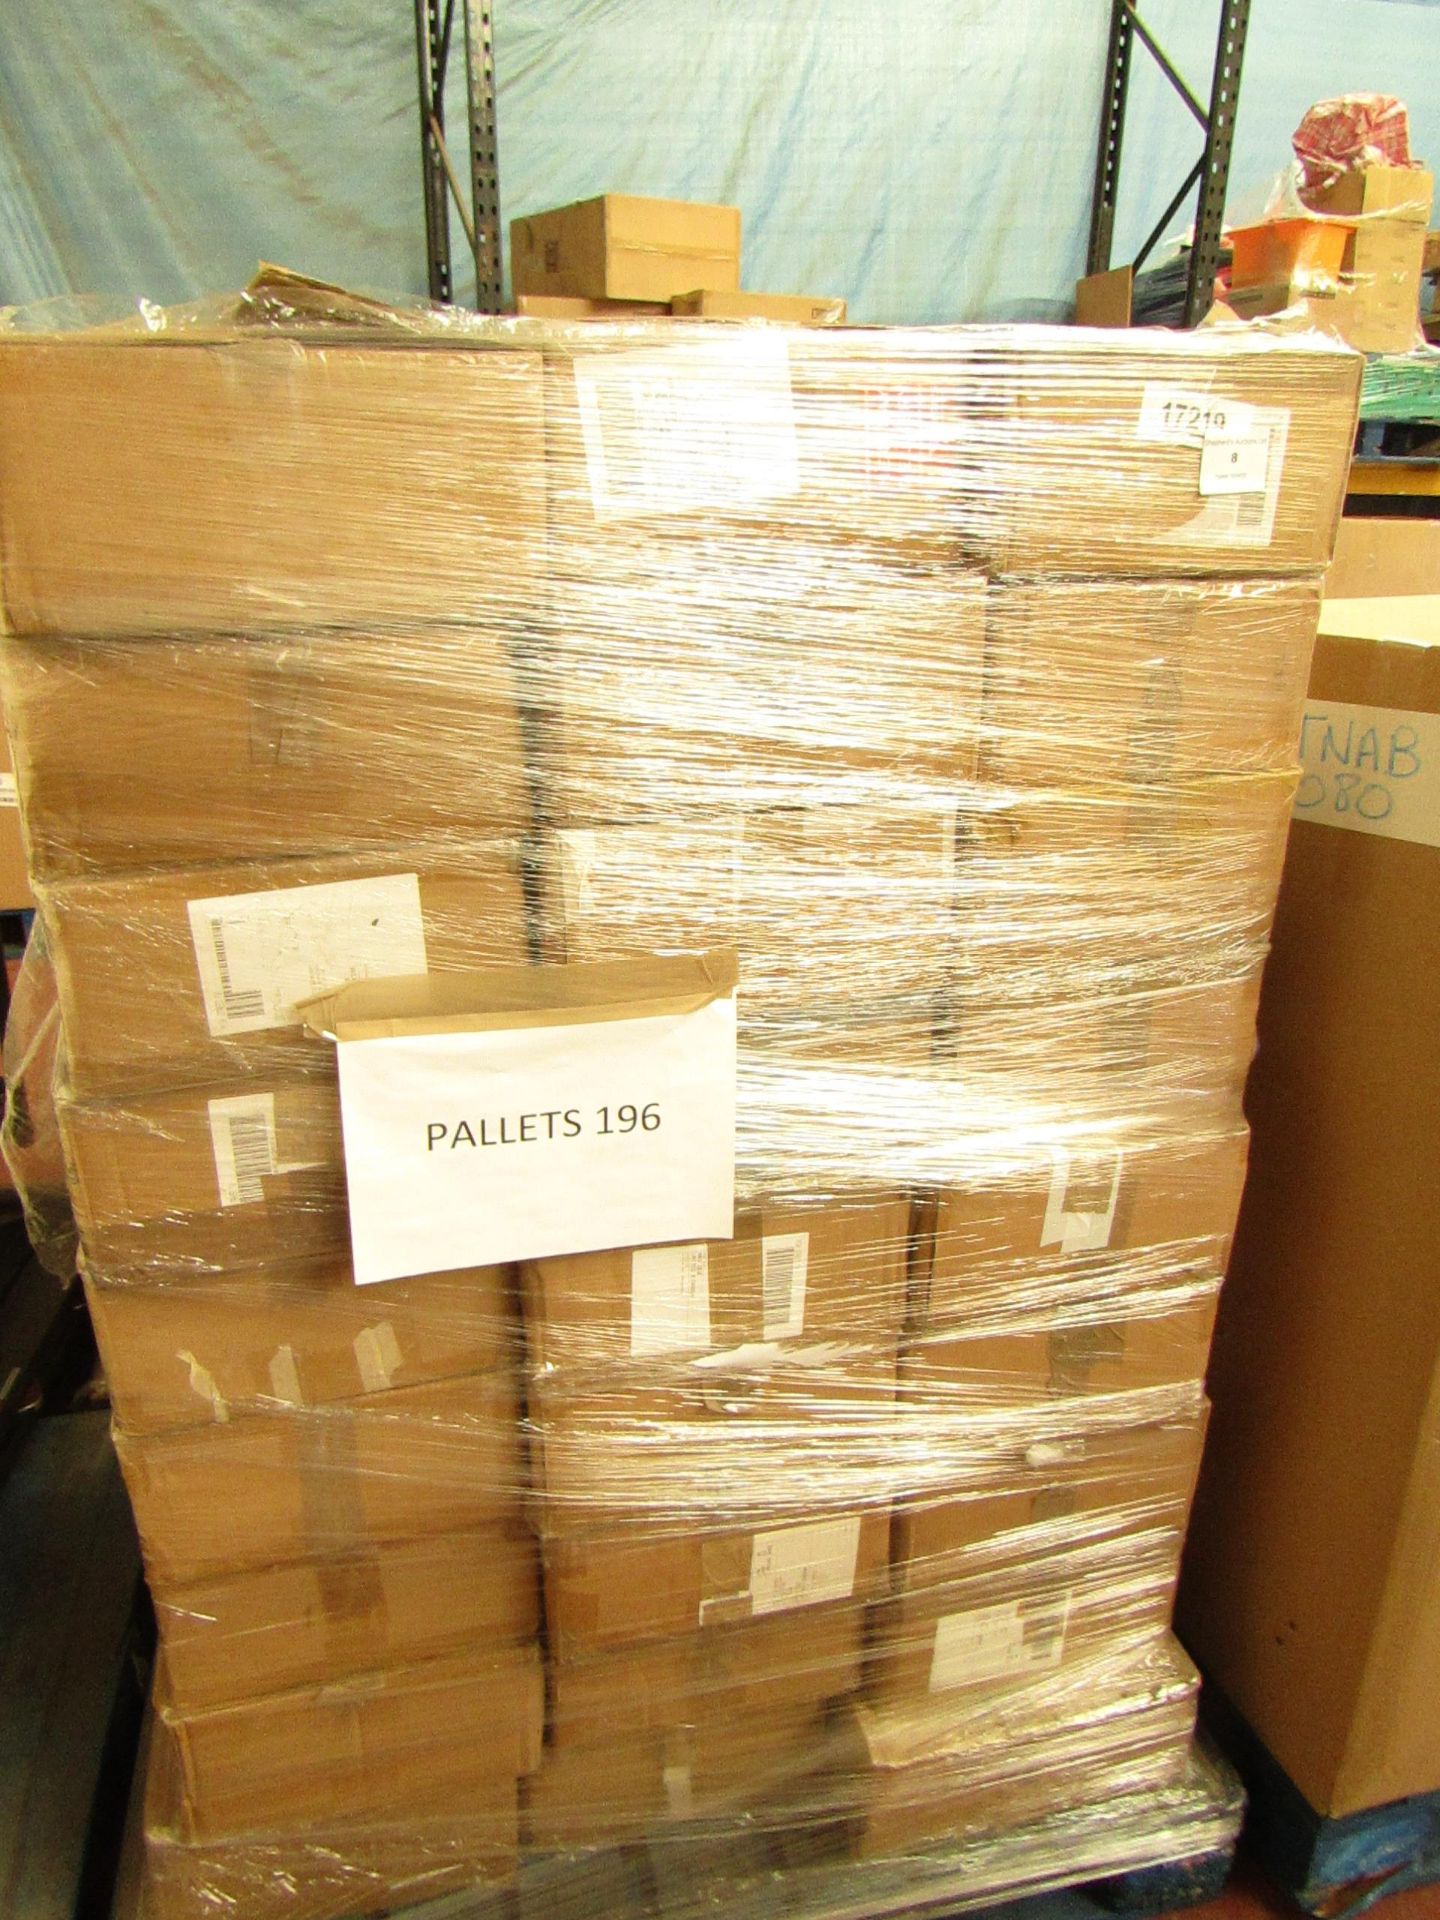 | 27X | THE PALLET NU BREEZE DRYERS | BOXED AND UNCHECKED | NO ONLINE RE-SALE | PALLET NO 198 |